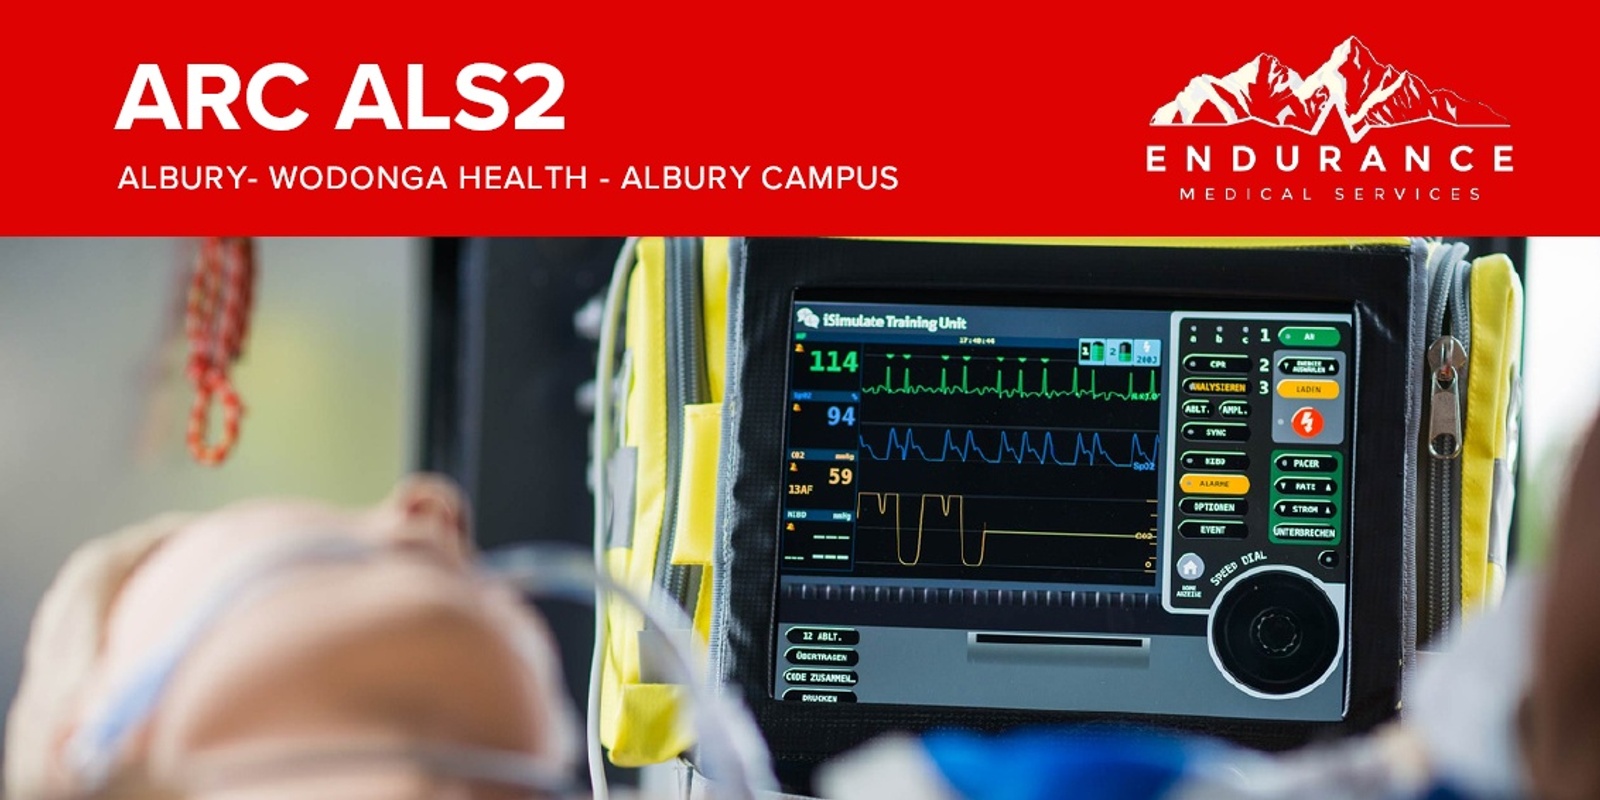 Banner image for ALBURY ARC Advanced Life Support Level 2